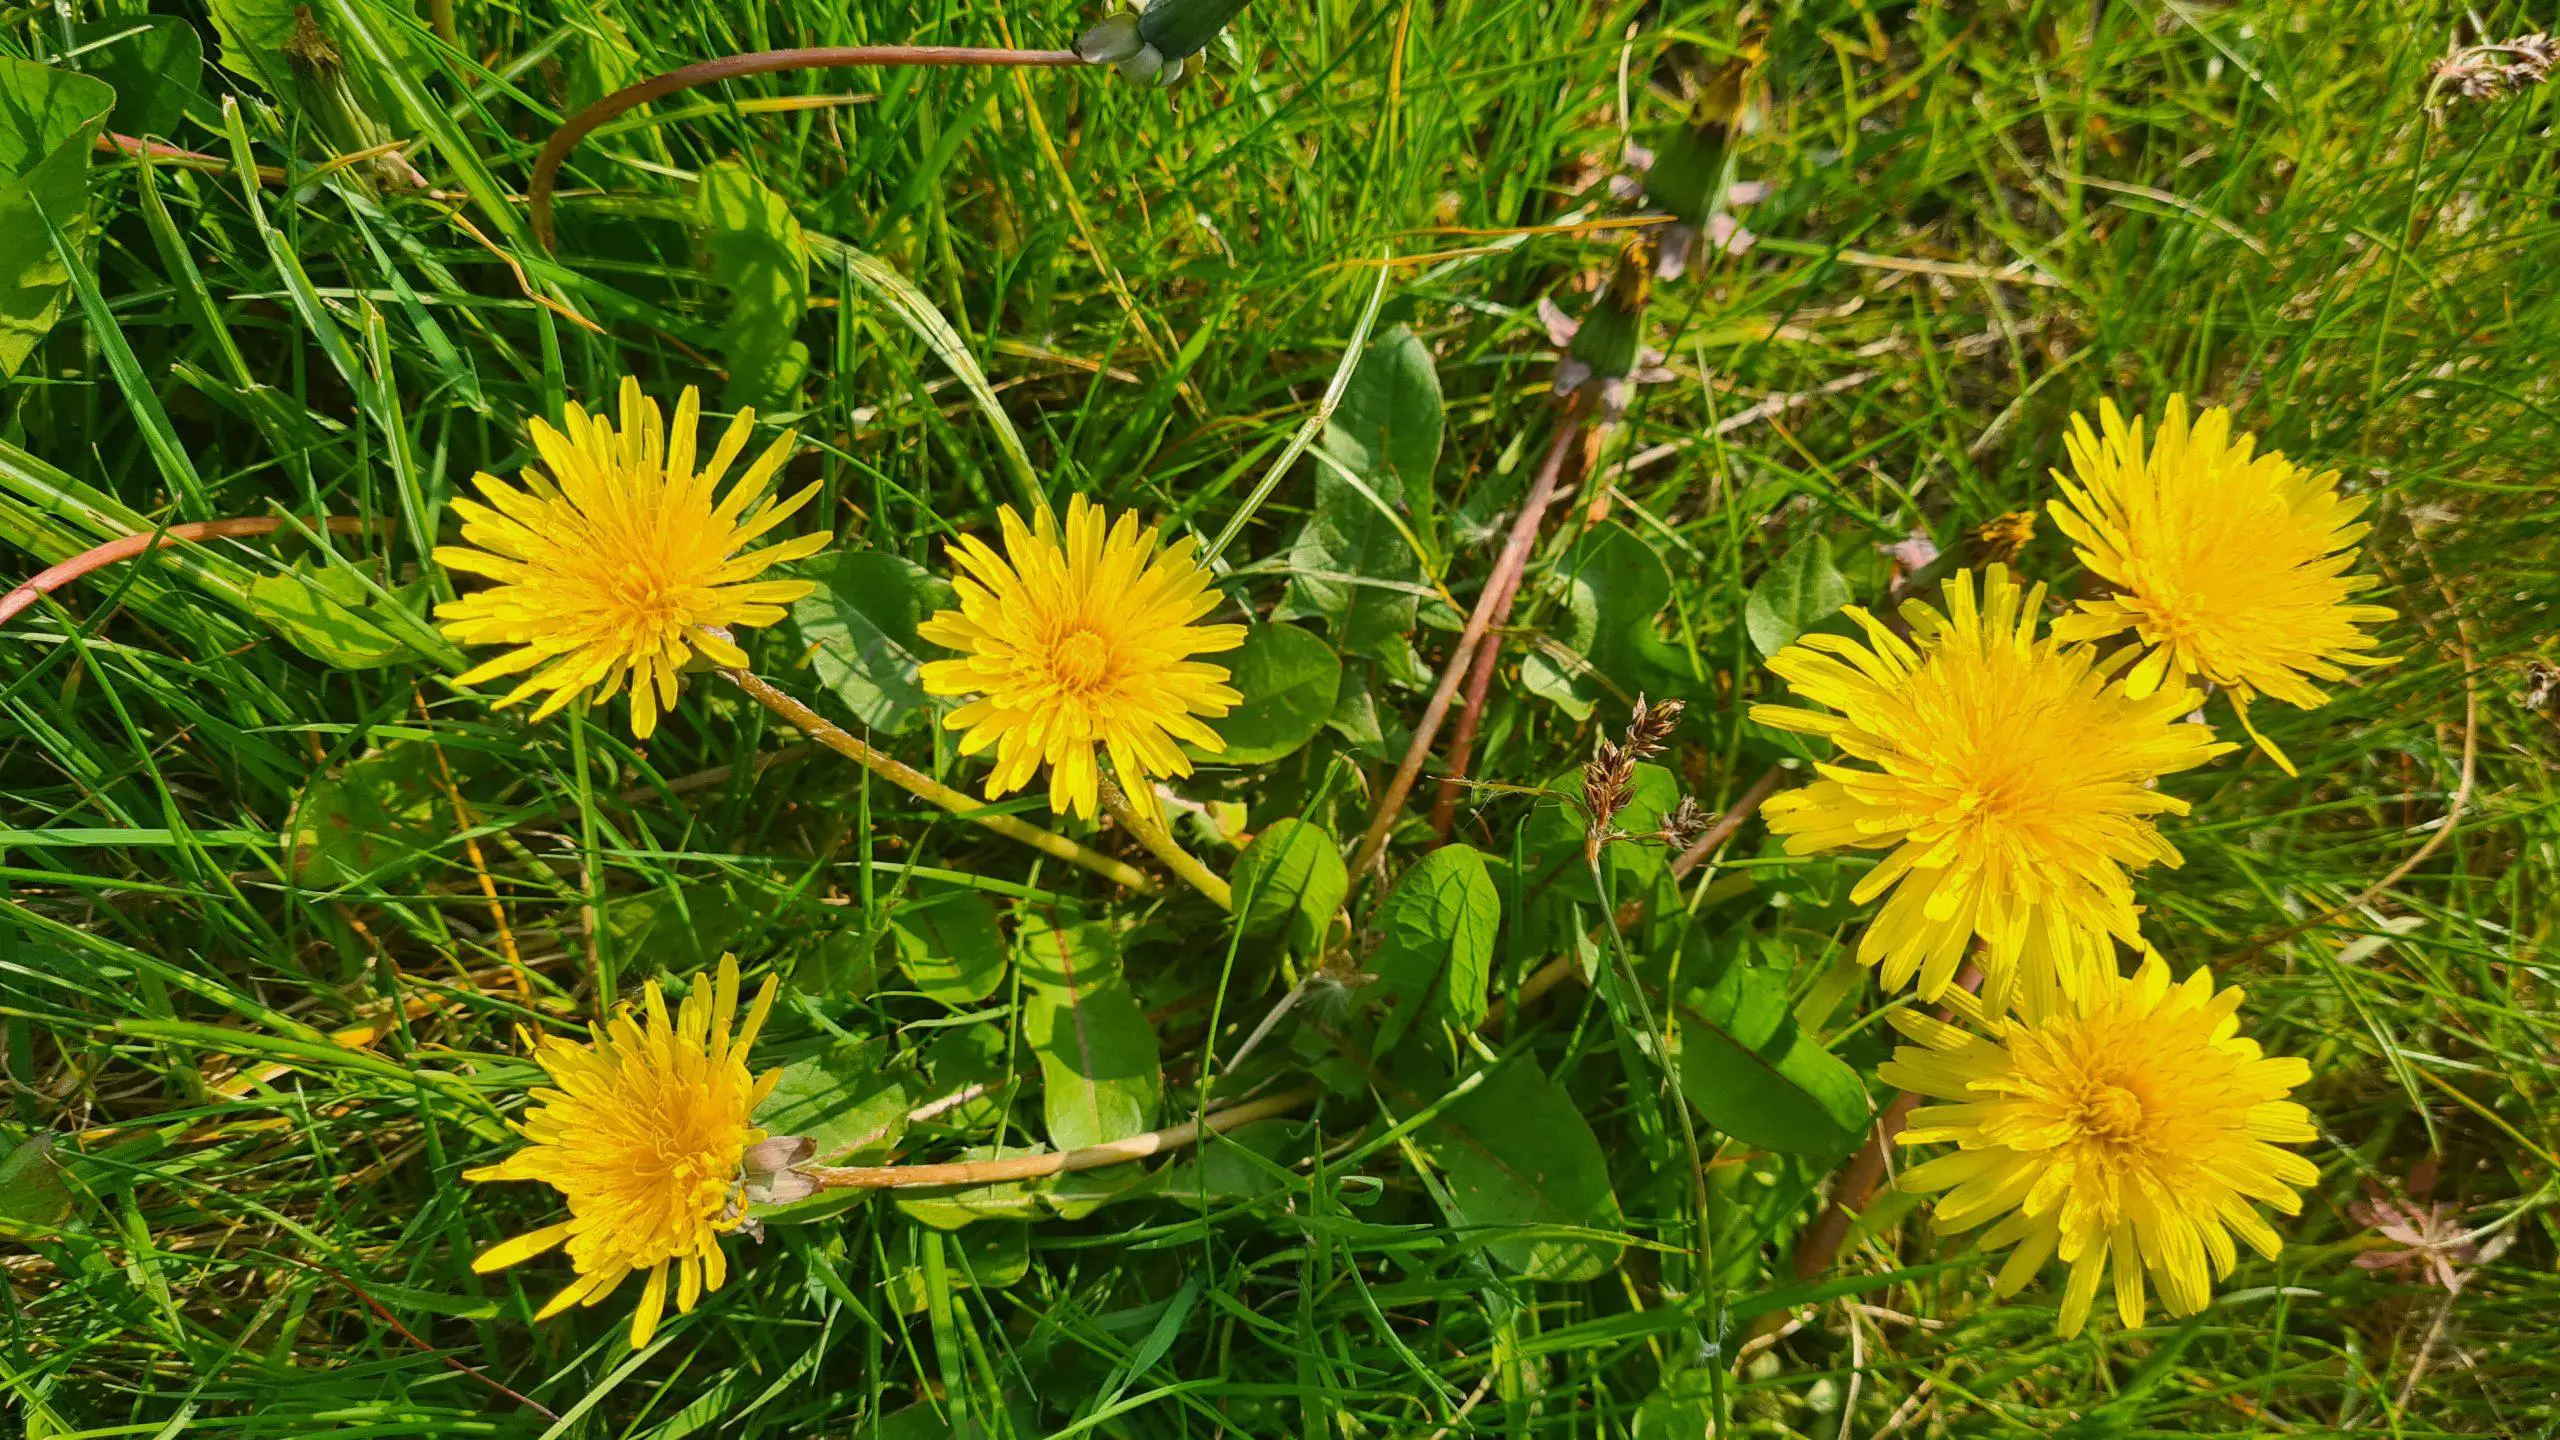 Dandelions grow wildly in gardens and lawns